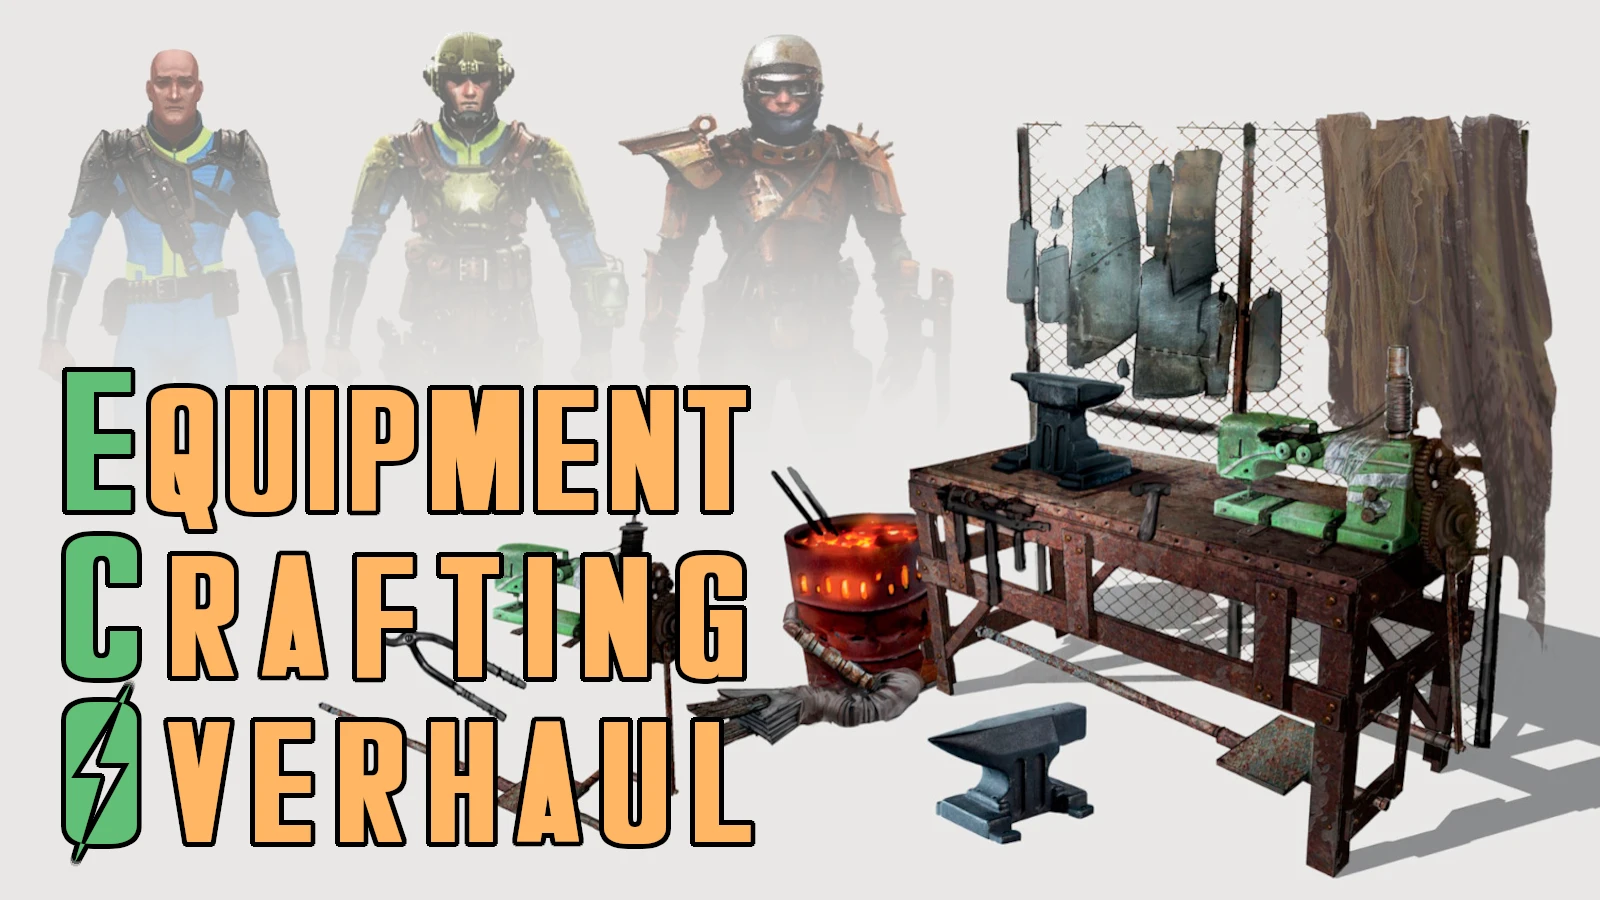 All crafting items fallout 4 фото 43